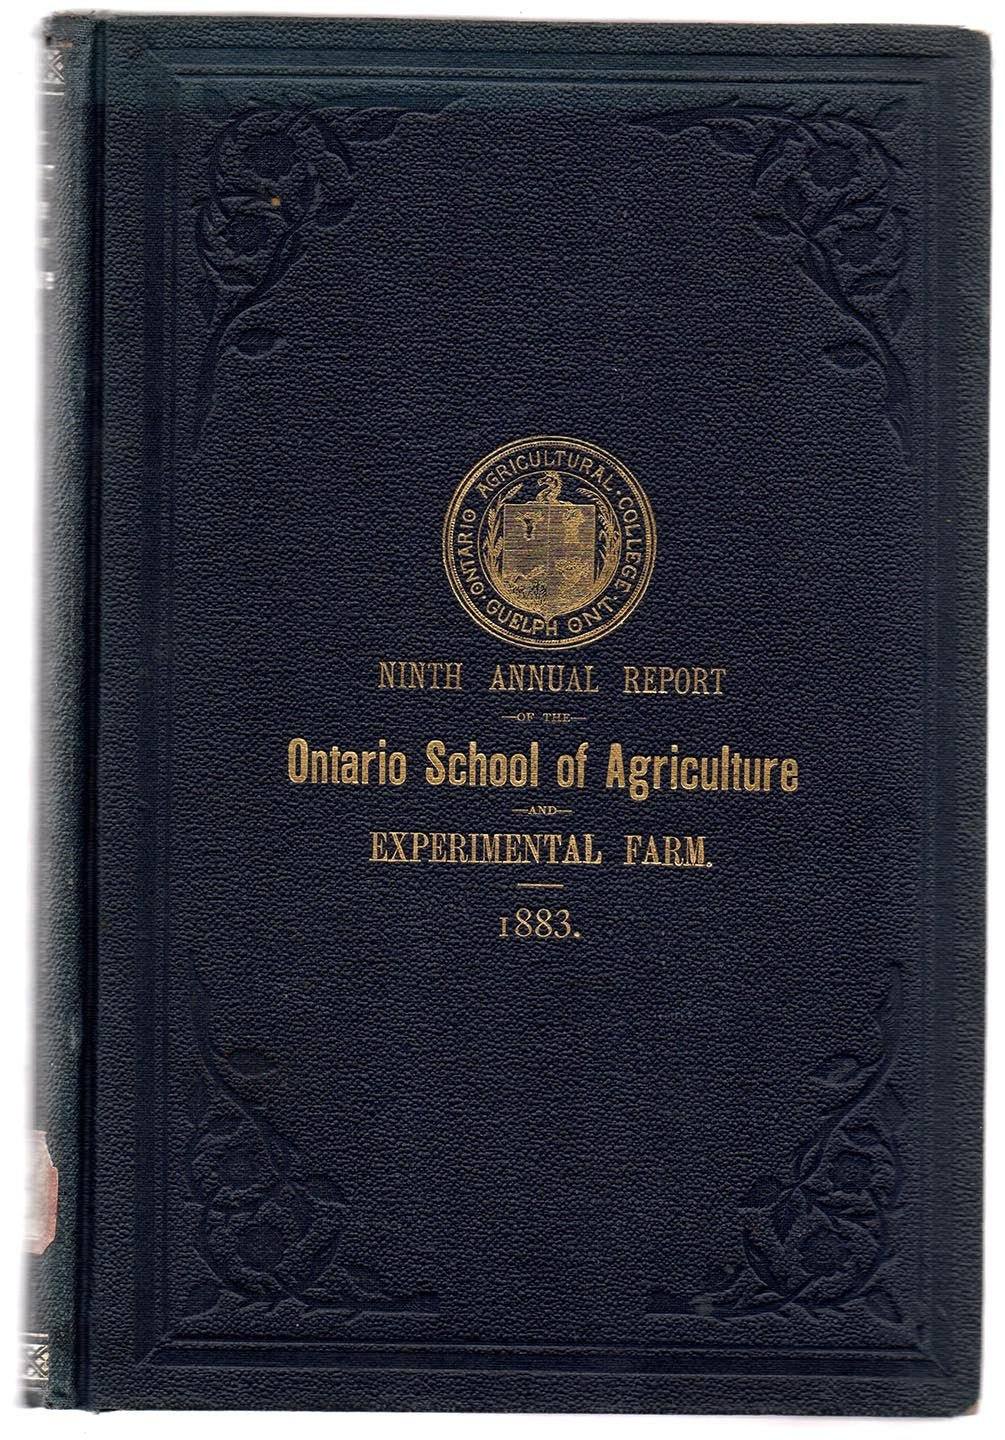 Ninth Annual Report of the Ontario Agricultural College and Experimental Farm, For the Year Ending 31st December, 1883; Report of the Professor of Agriculture, Farm Manager, and Experimental Superintendent